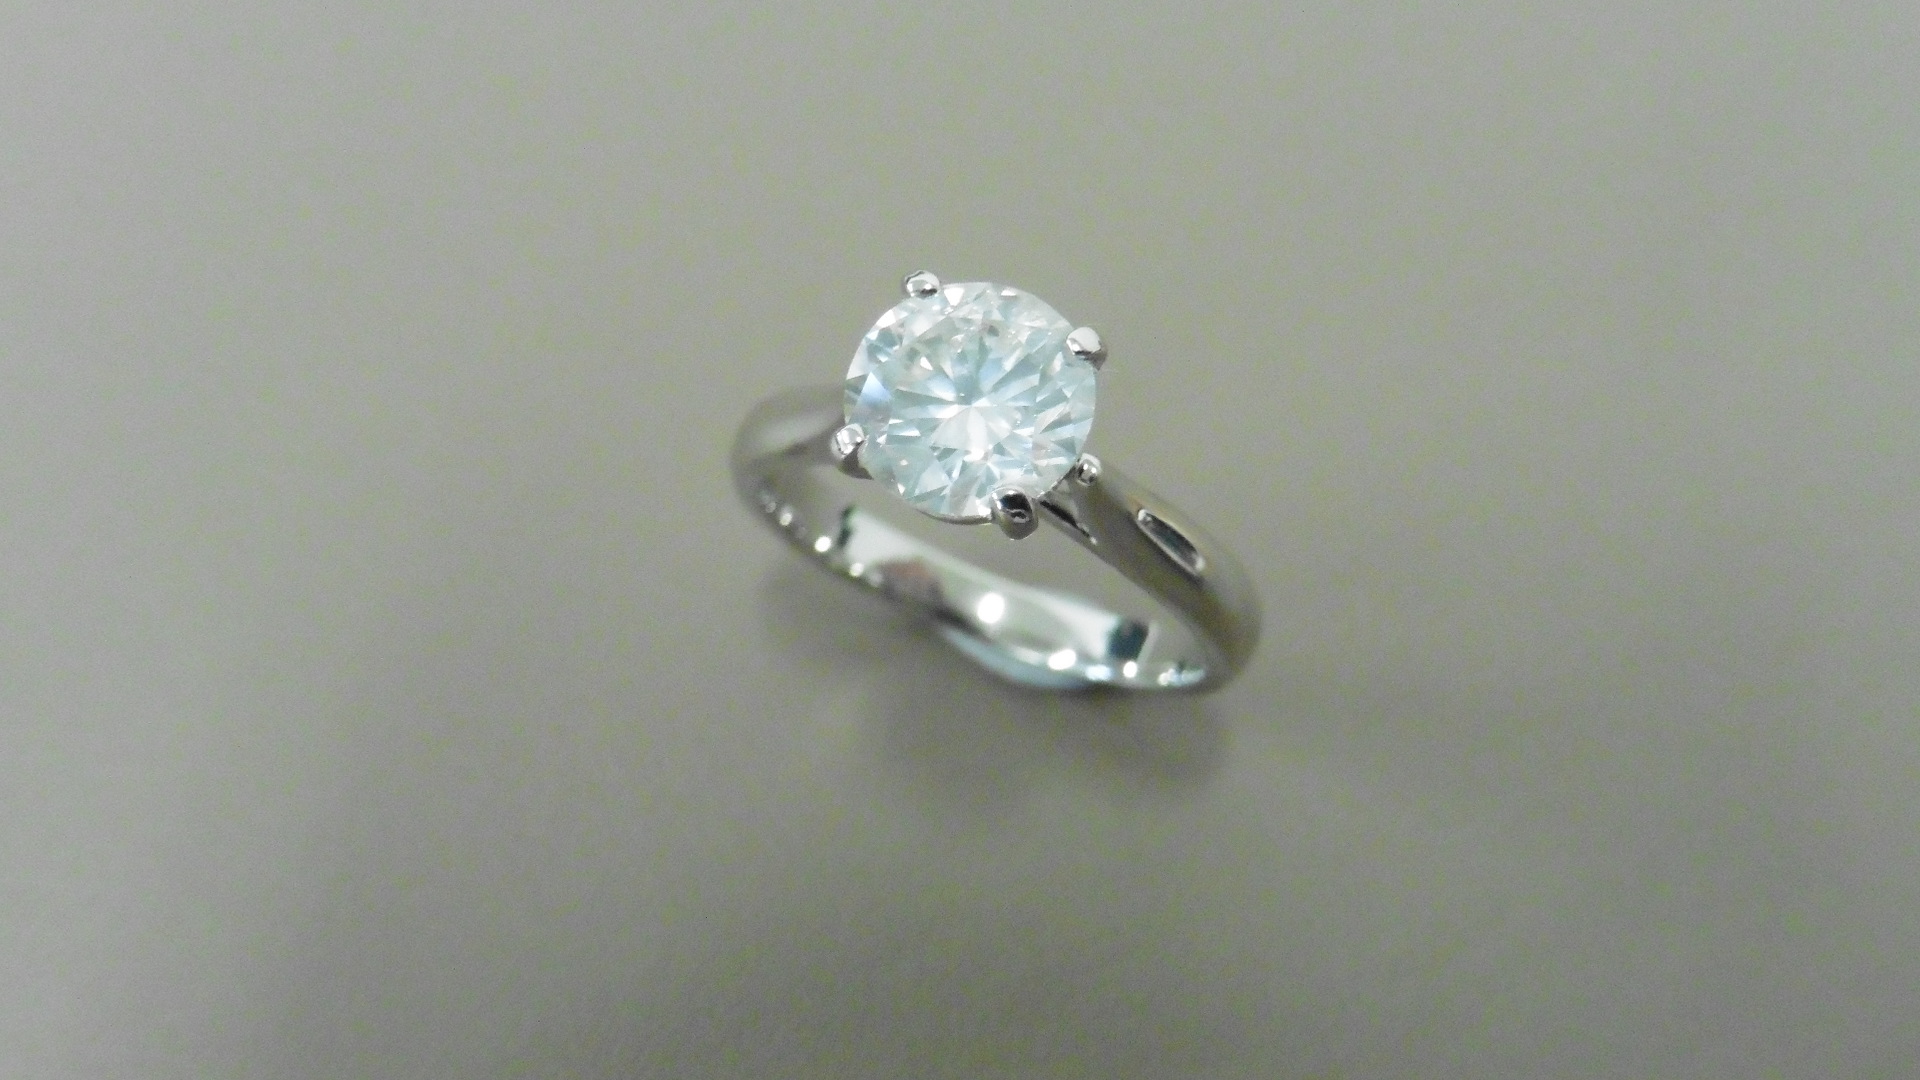 1.04ct diamond solitaire ring with a brilliant cut diamond - Image 3 of 3